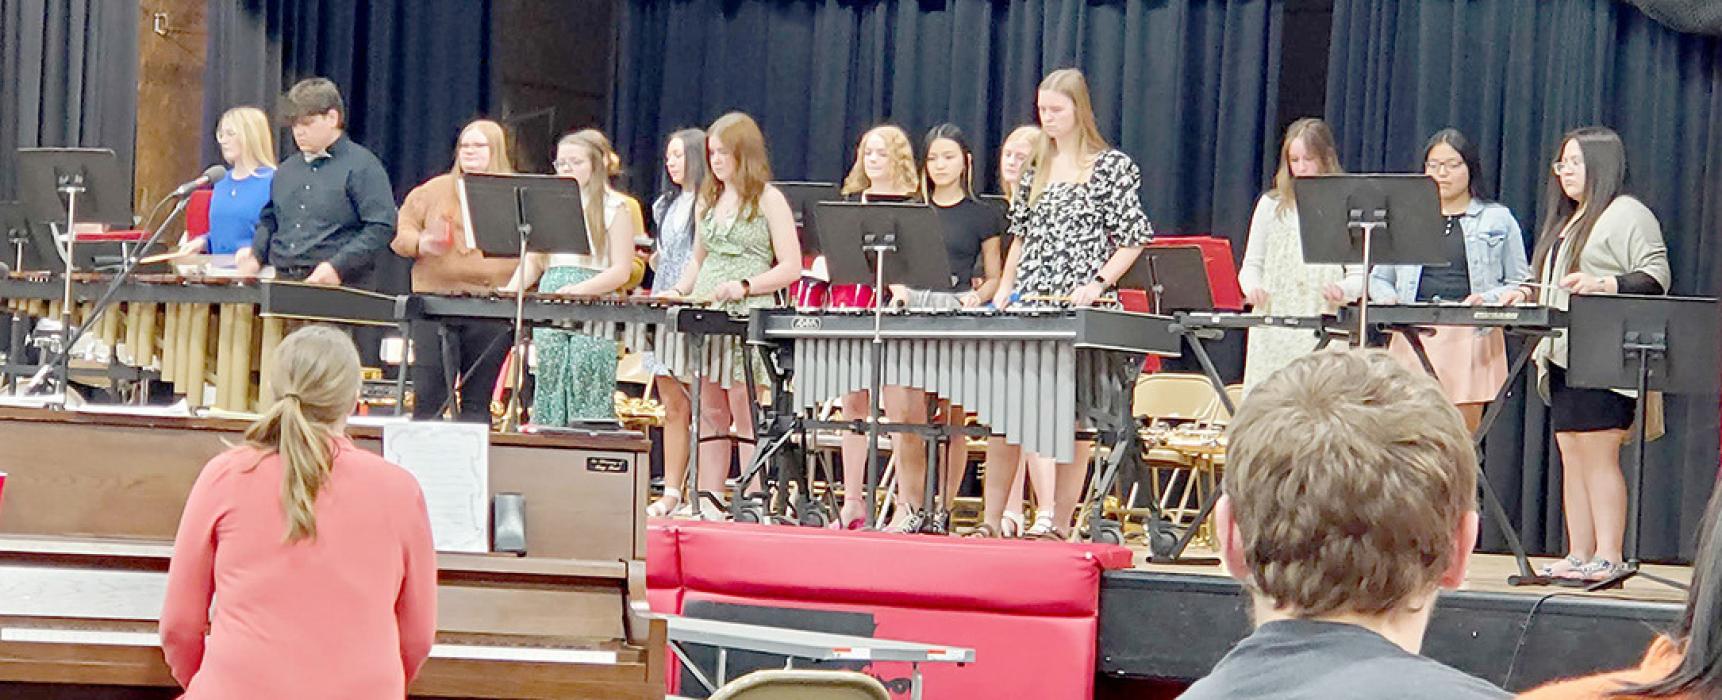 The percussion ensemble kicked off the evening’s entertainment with Afro Blue by Mongo Santamaria.